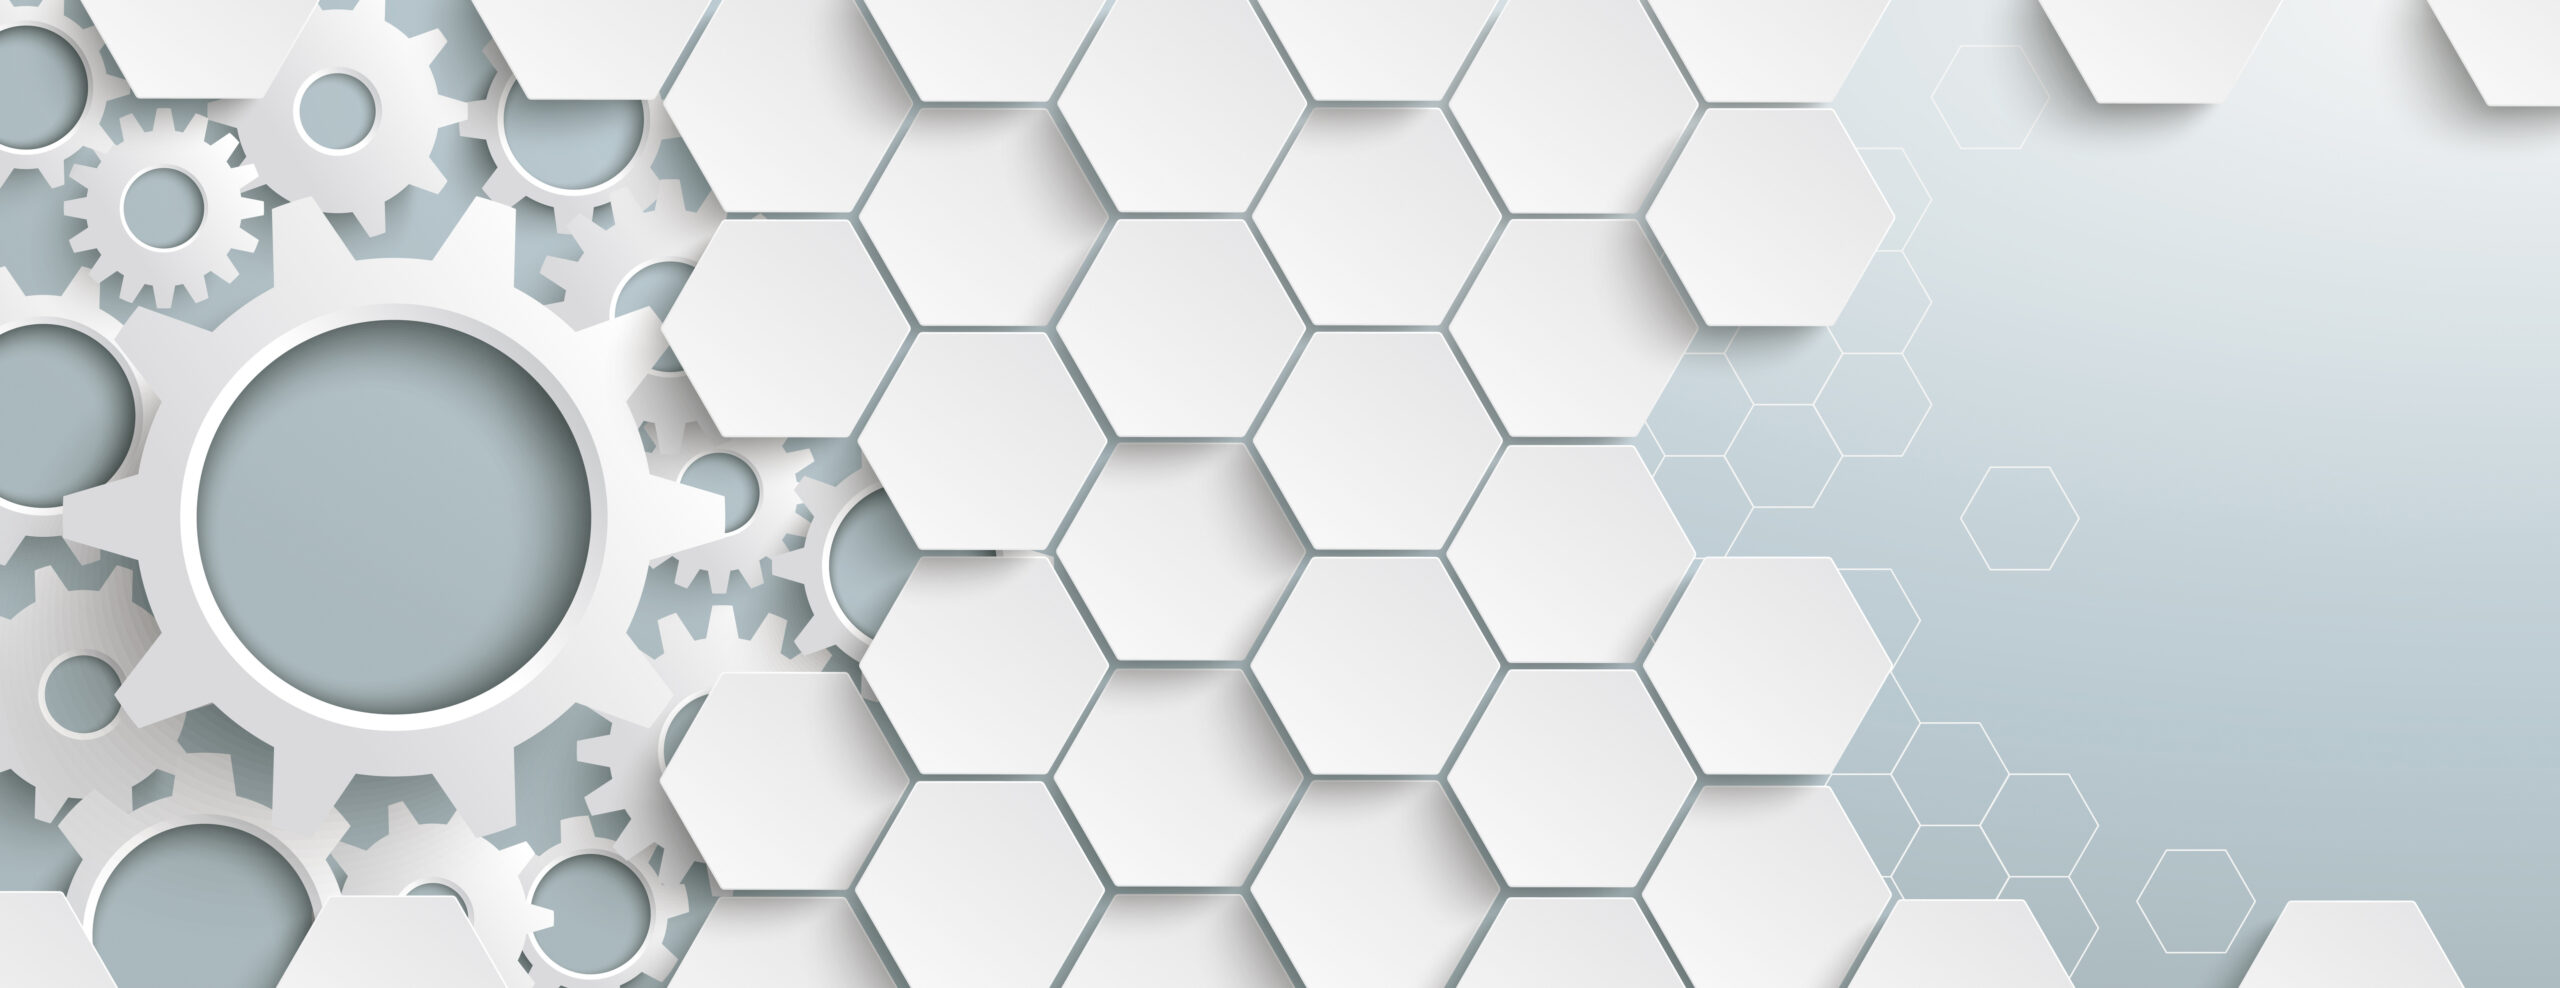 Hexagon structure with gears on the gray background. Eps 10 vector file.